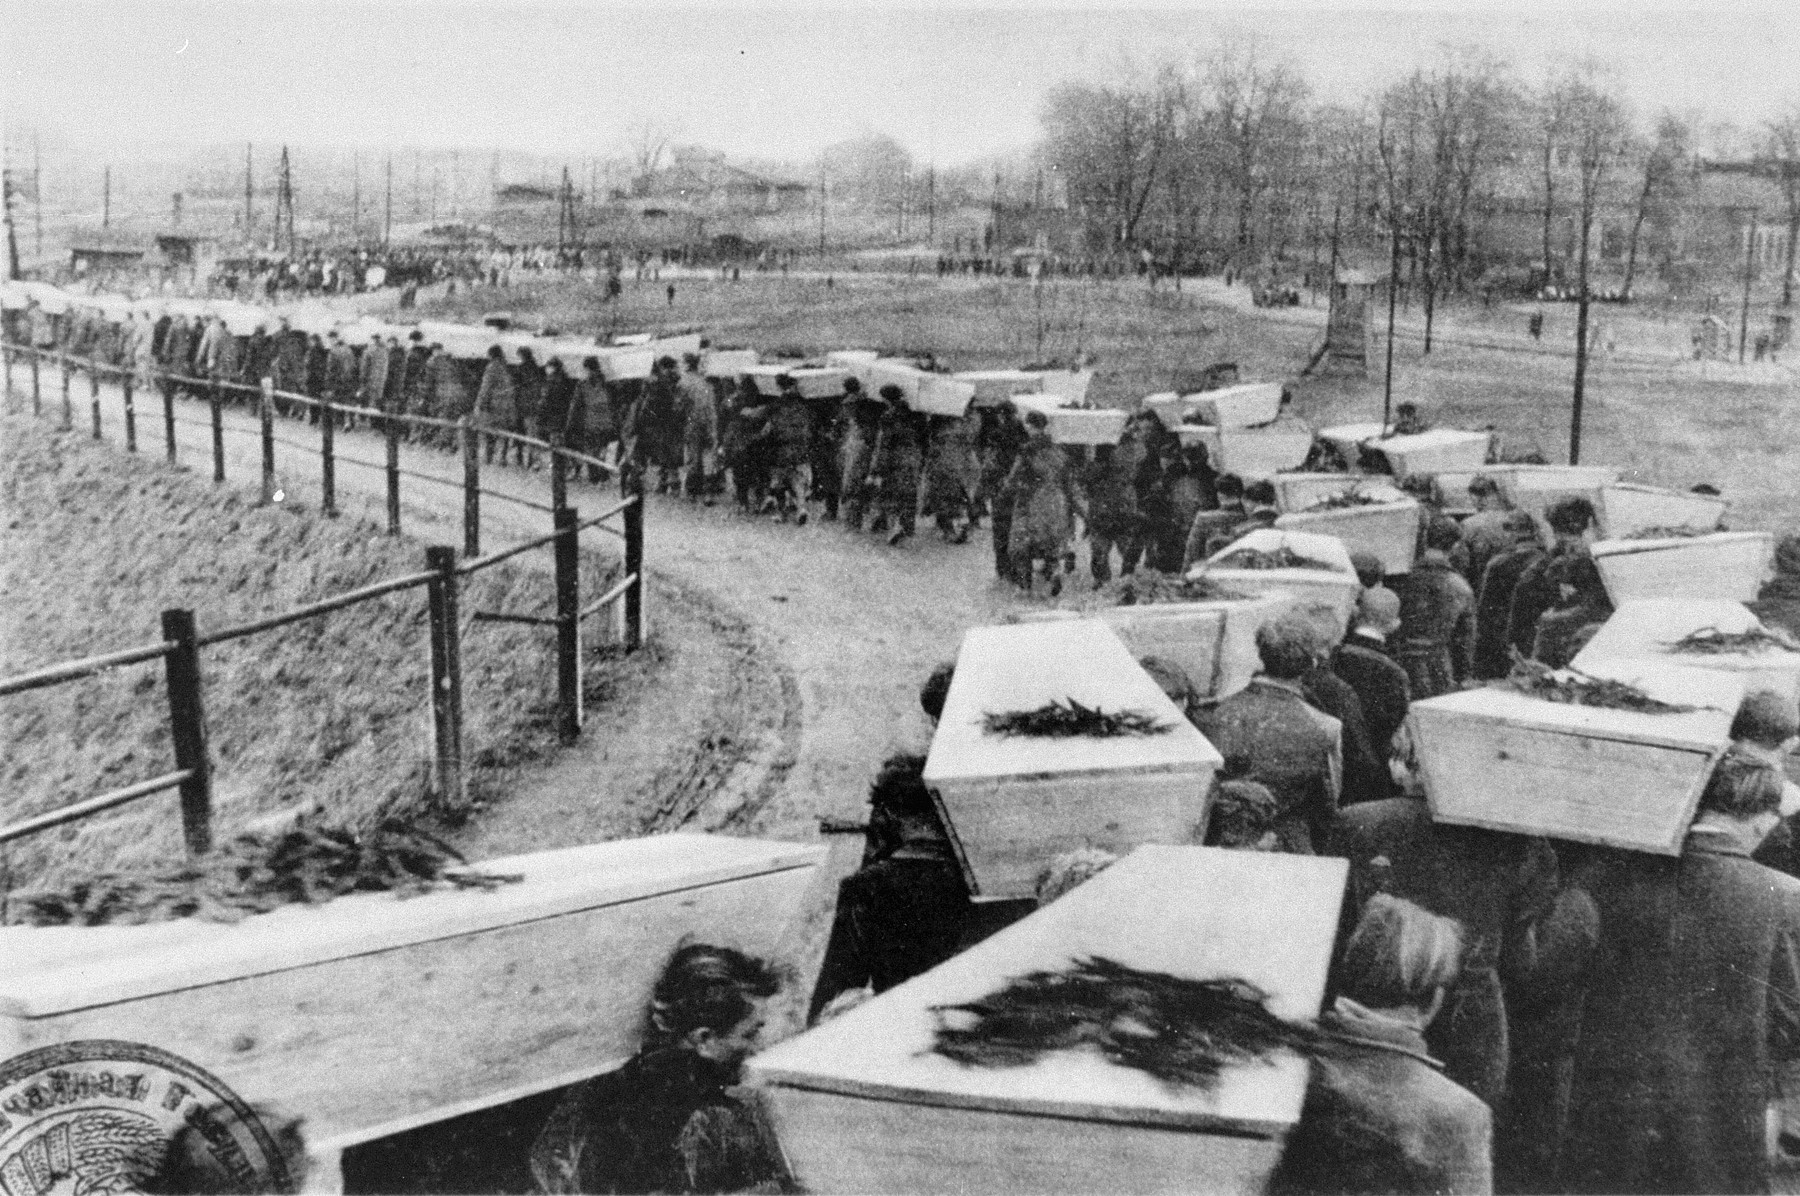 Funeral of inmates who could not be saved or who were killed by the SS before the liberation of Auschwitz.